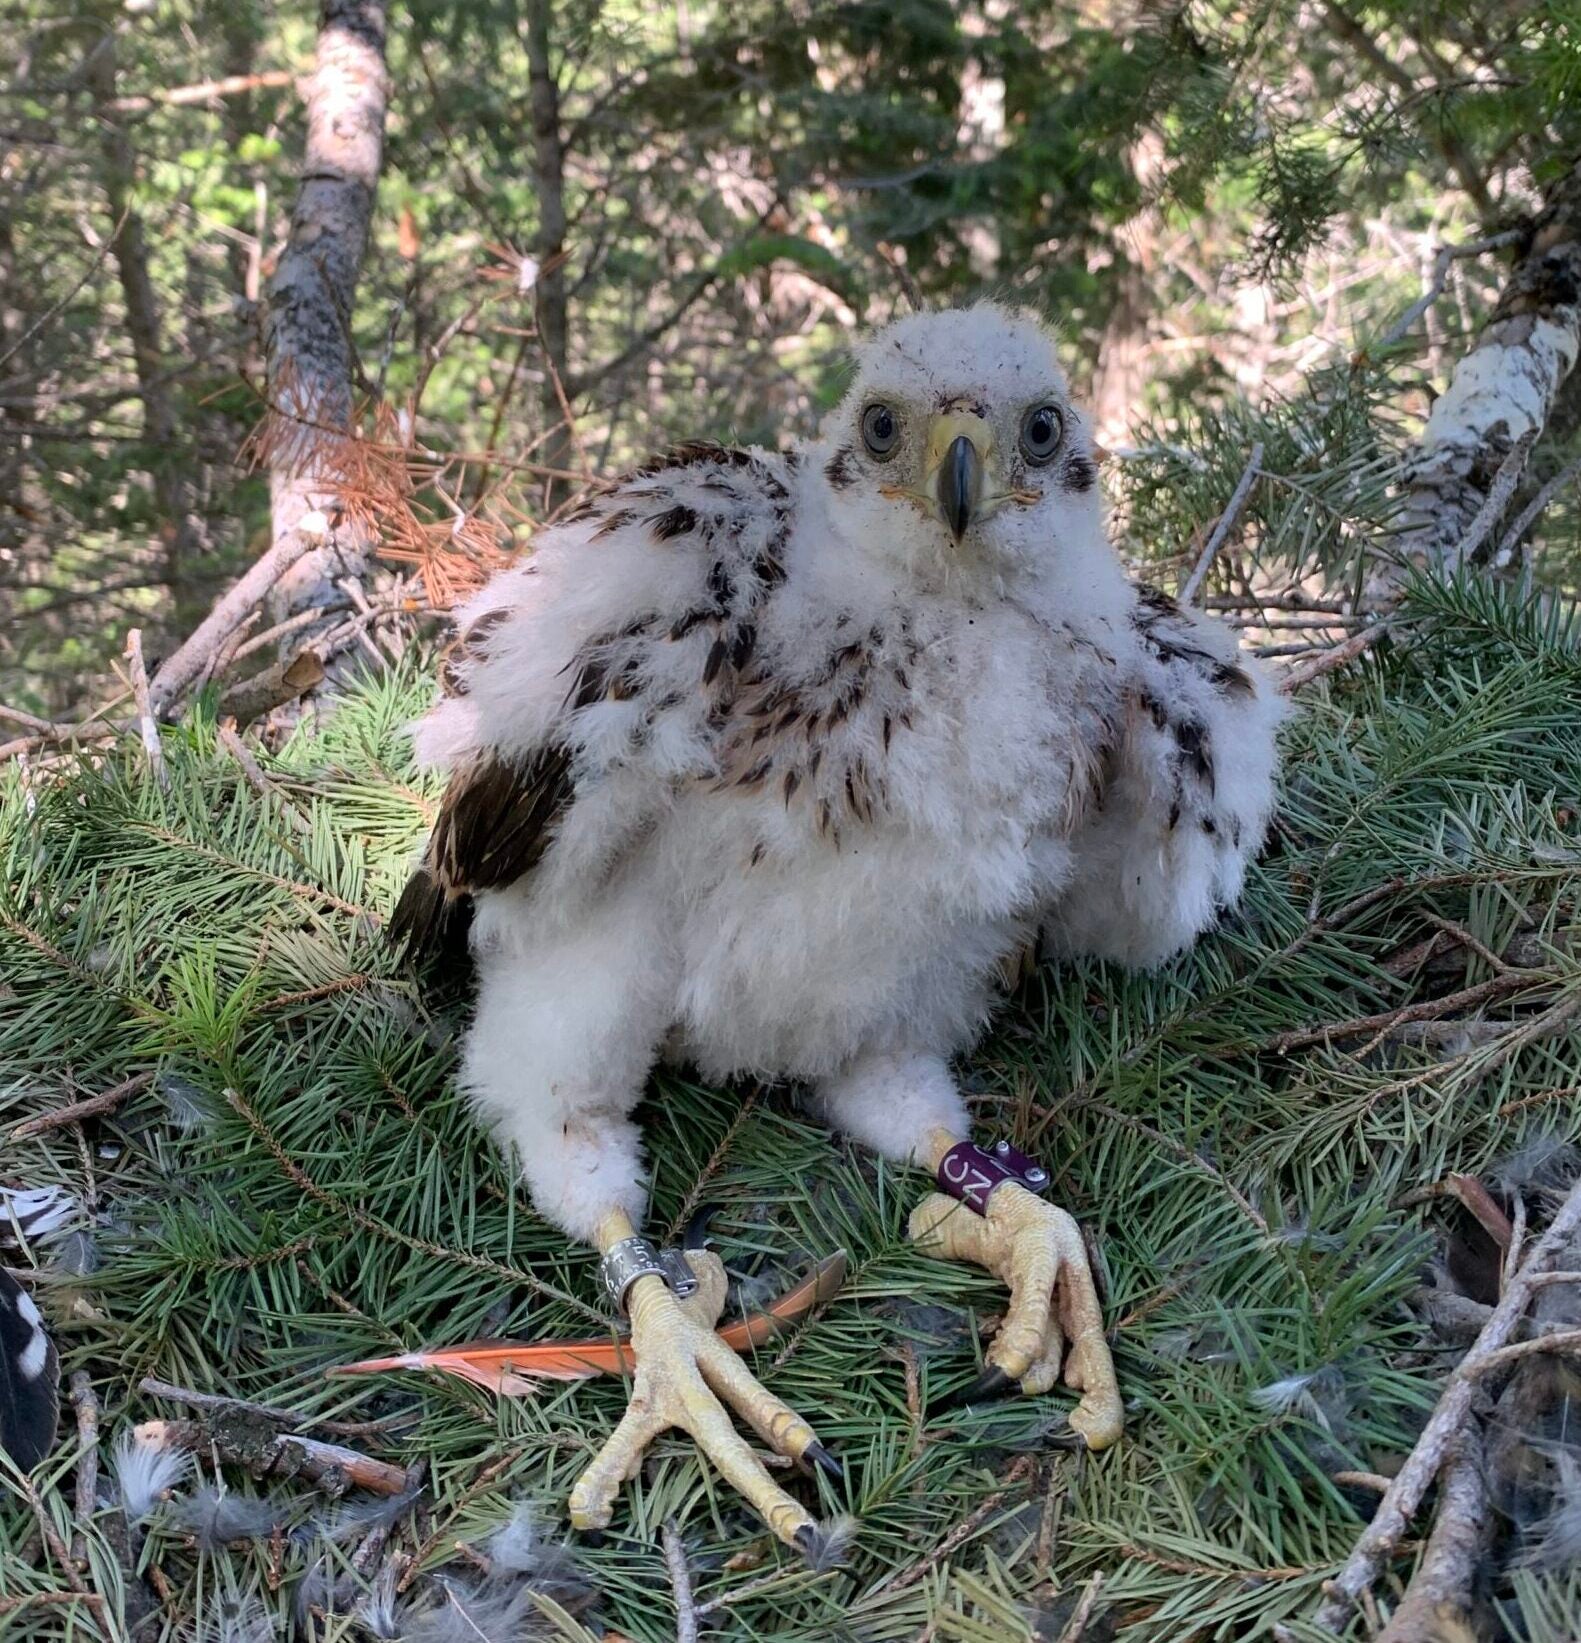 a fluffy nestling has mostly cottonball down, with just a few brown feathers beginning to peek through. Its large pale yellow feet grasp awkwardly on the nest and it can't quite stand on its own yet. It has a silver aluminum band on one leg, and a purple colored metal band on the other. The purple band has two white letters stamped into it.